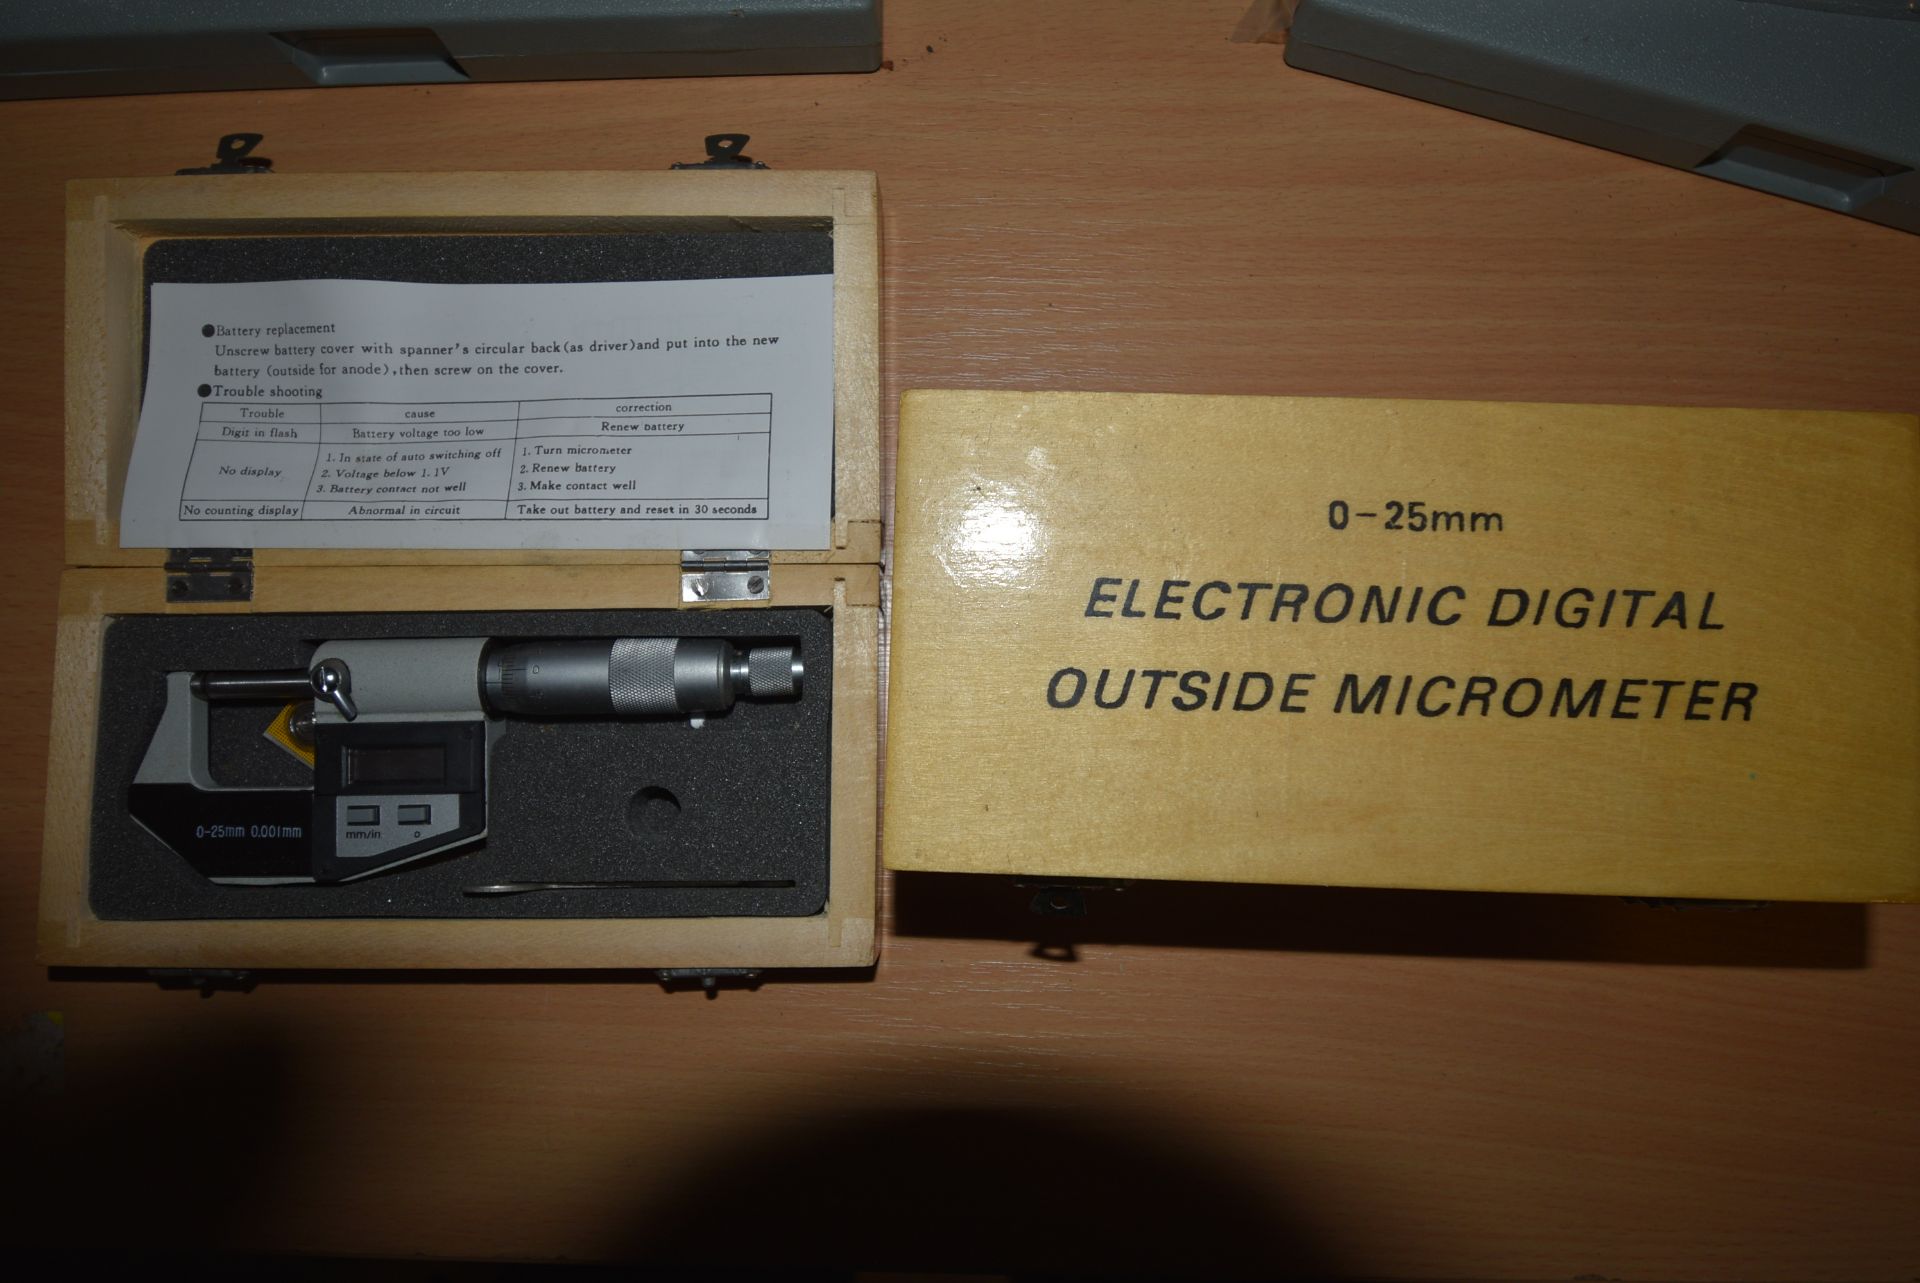 Three 0-25mm Electronic Digital Outside Micrometer